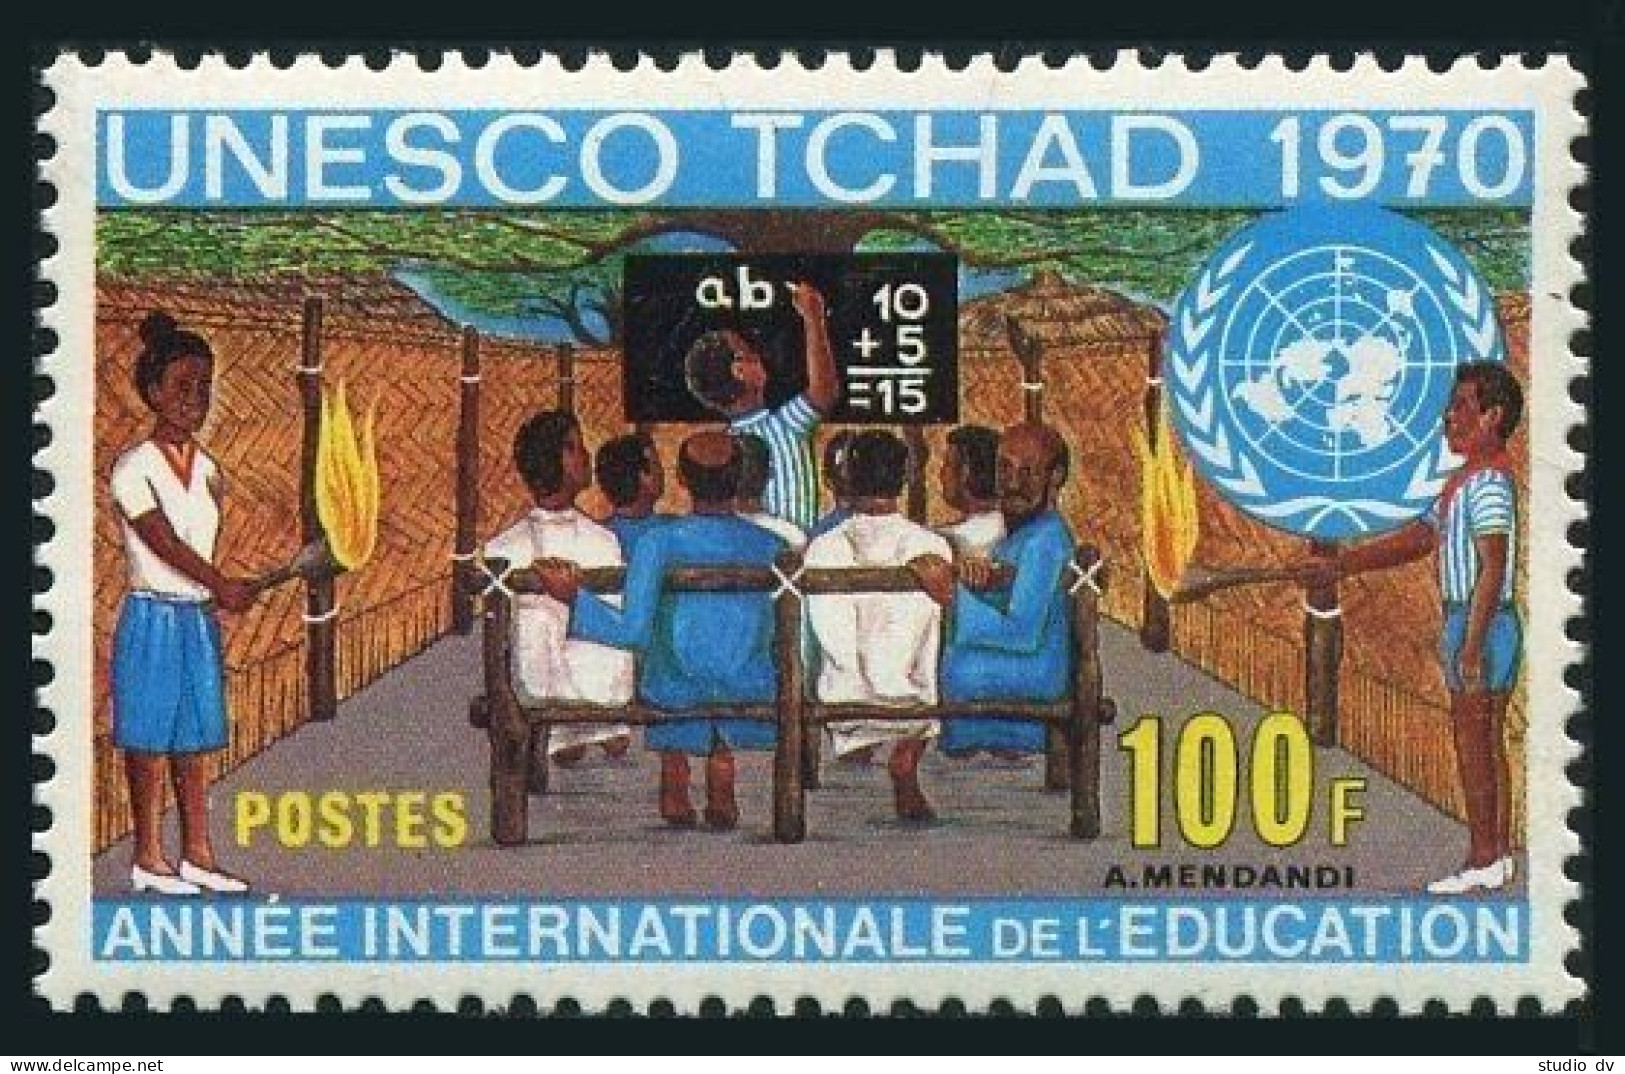 Chad 226,MNH.Michel 298. Education Year IEY-1970. Adult Education Class. - Chad (1960-...)